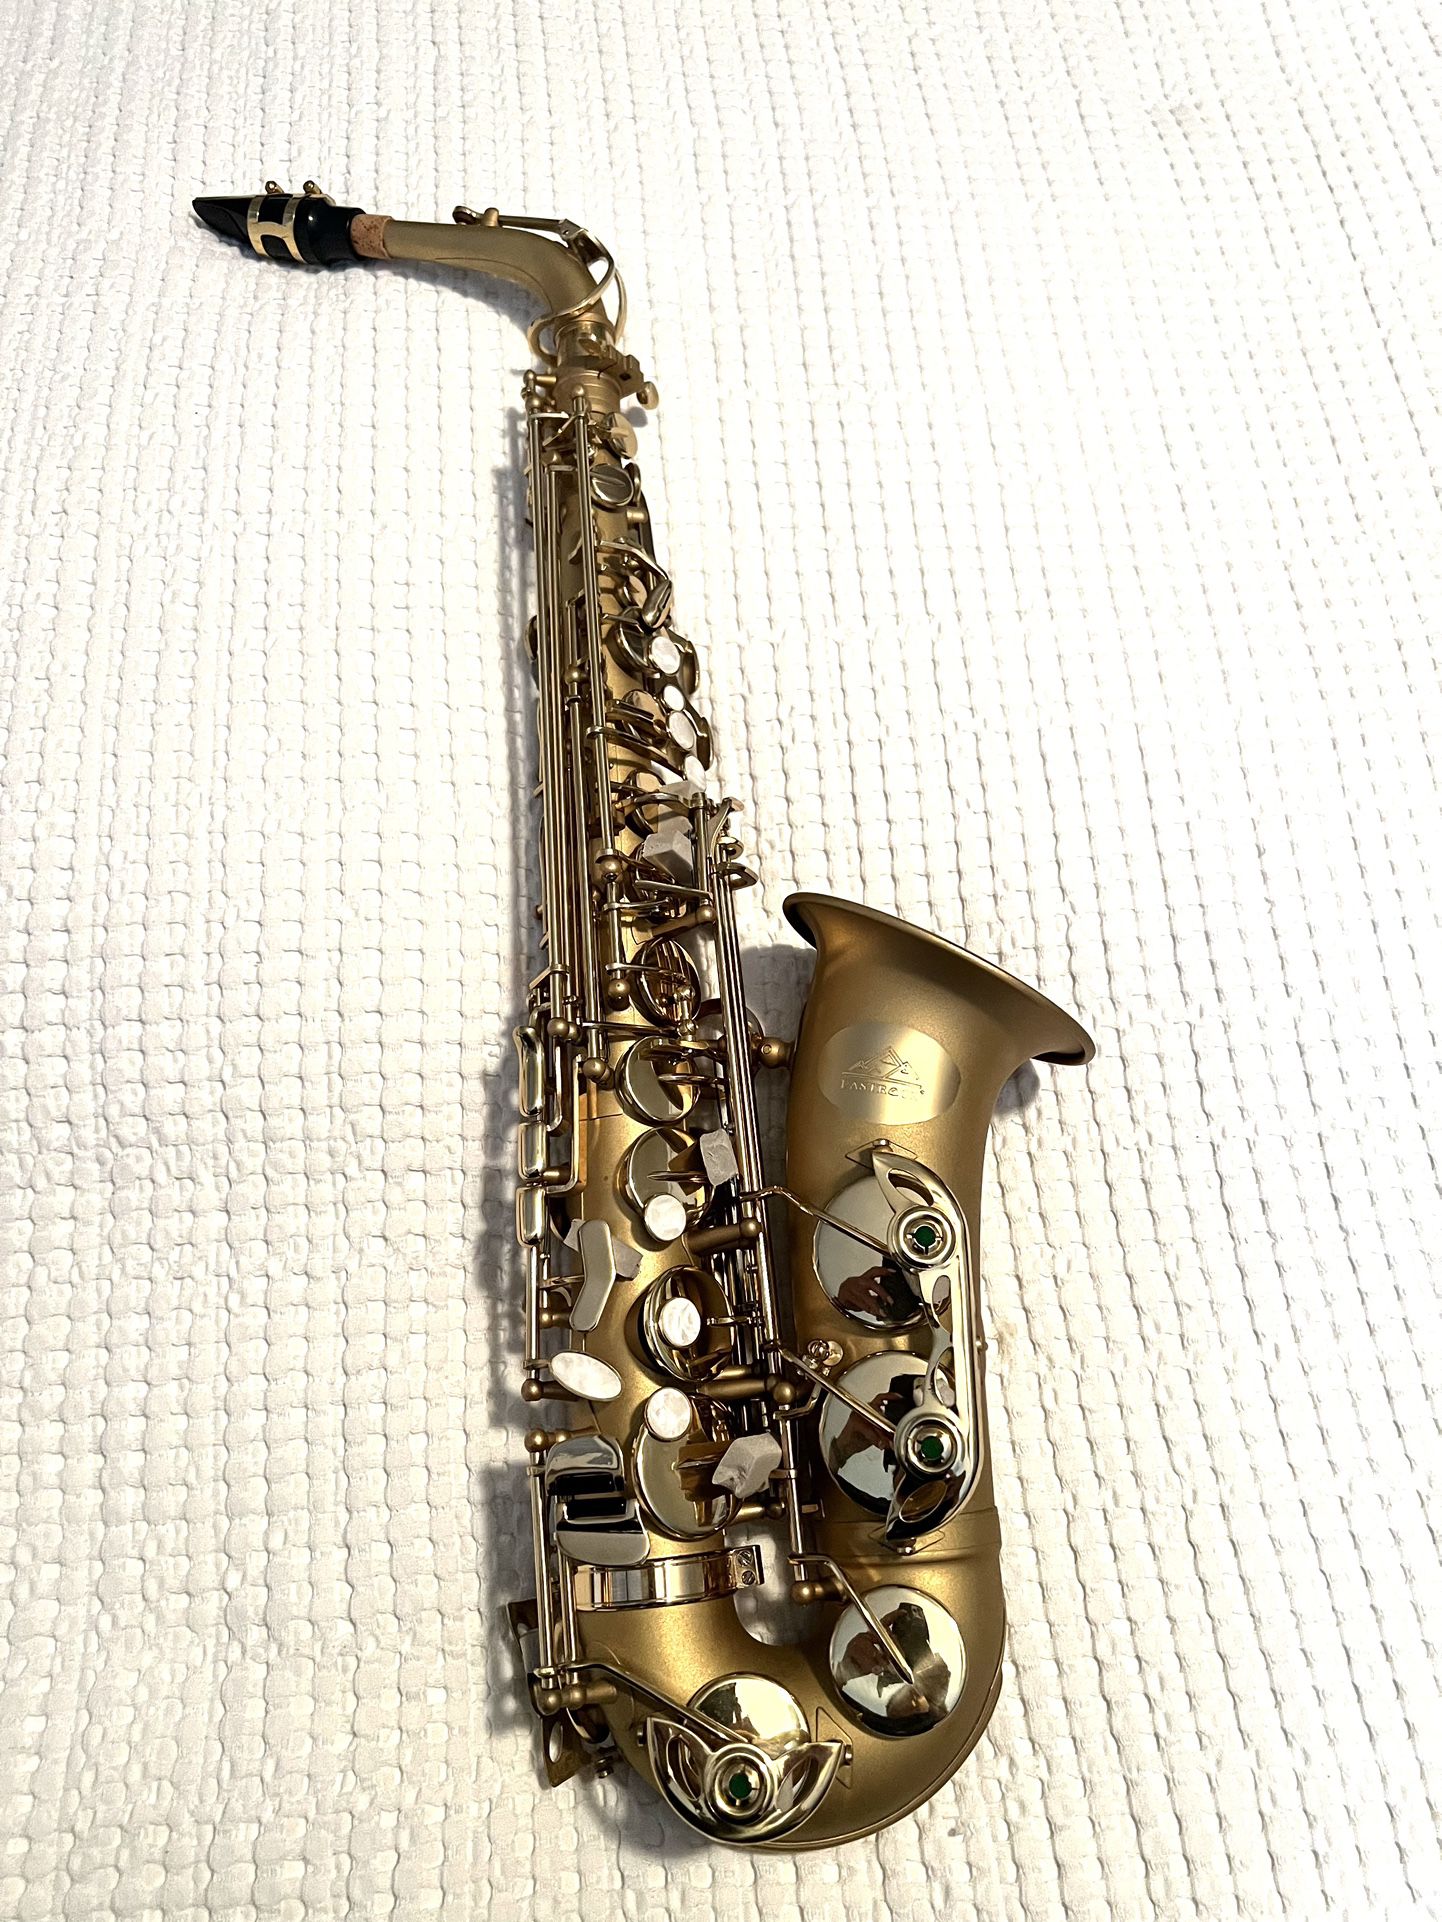 New Eastrock  Alto Saxophone E Flat, Case, Mouthpiece, Cleaning Cloth & Rod, Gloves, Neck Strap, Frosted Golden